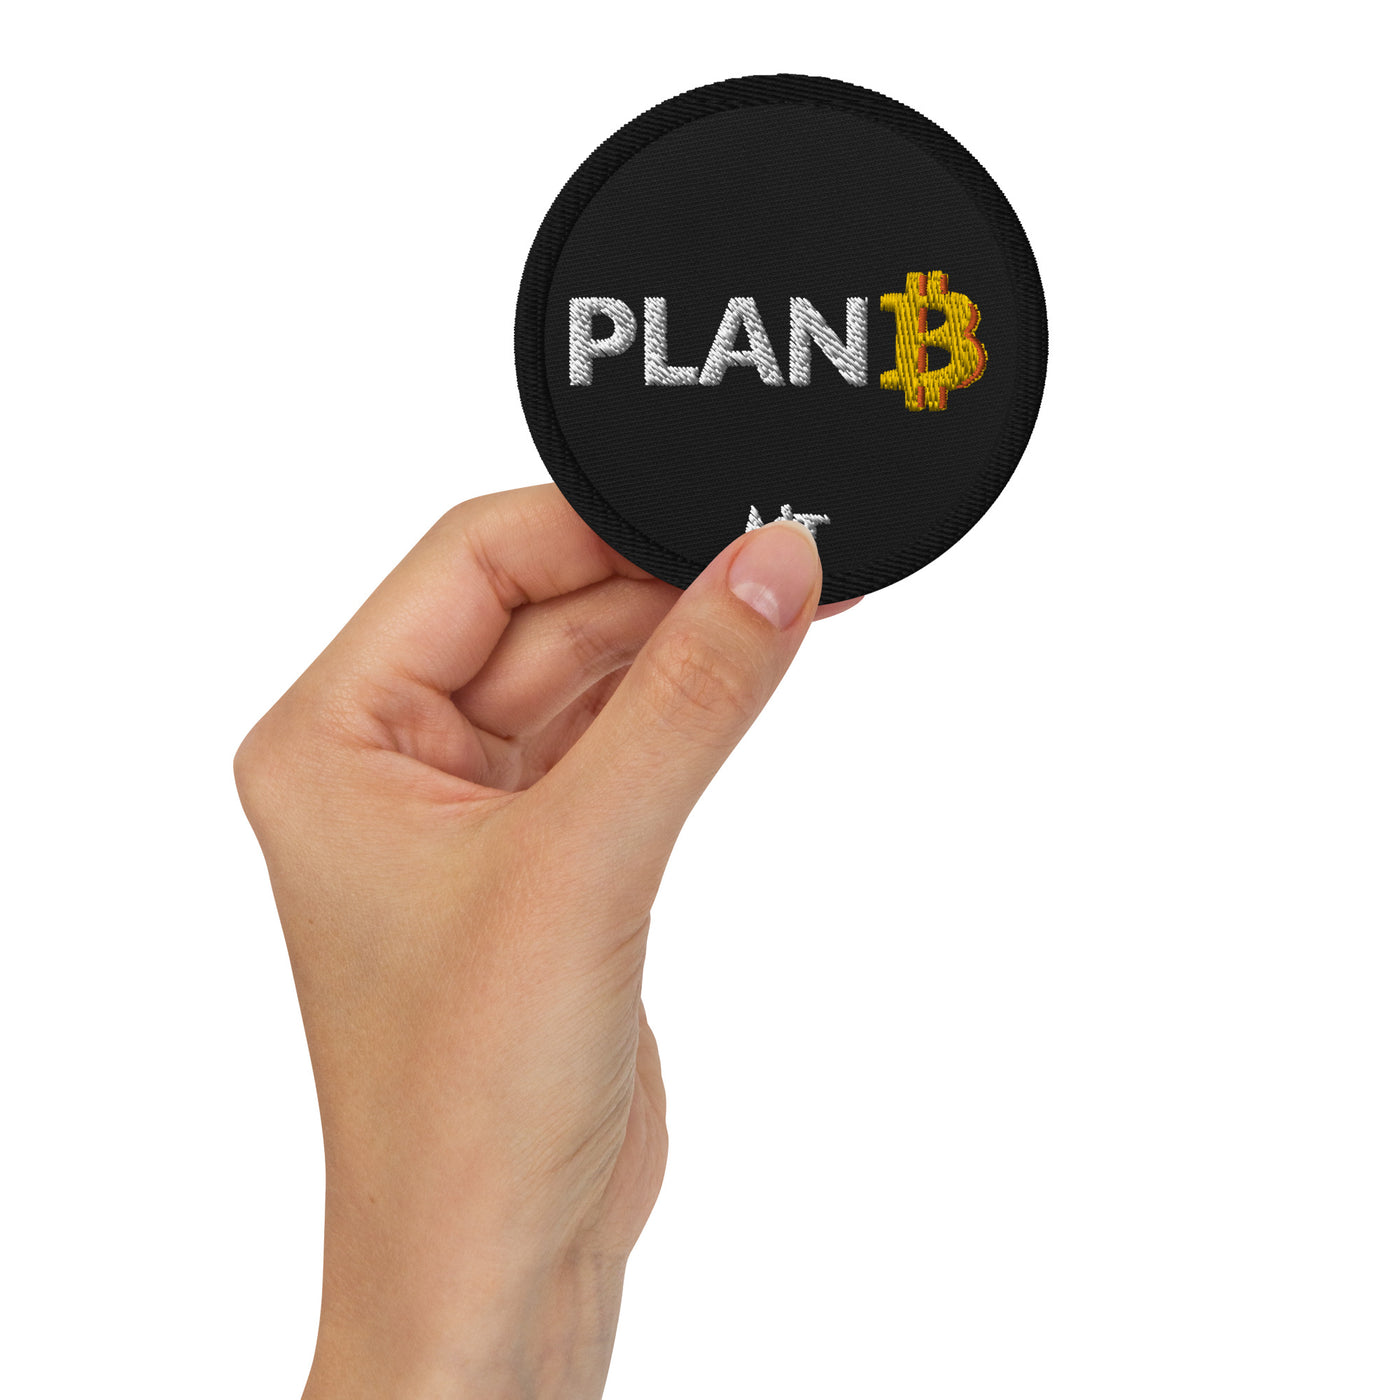 Plan B v1 - Embroidered patches